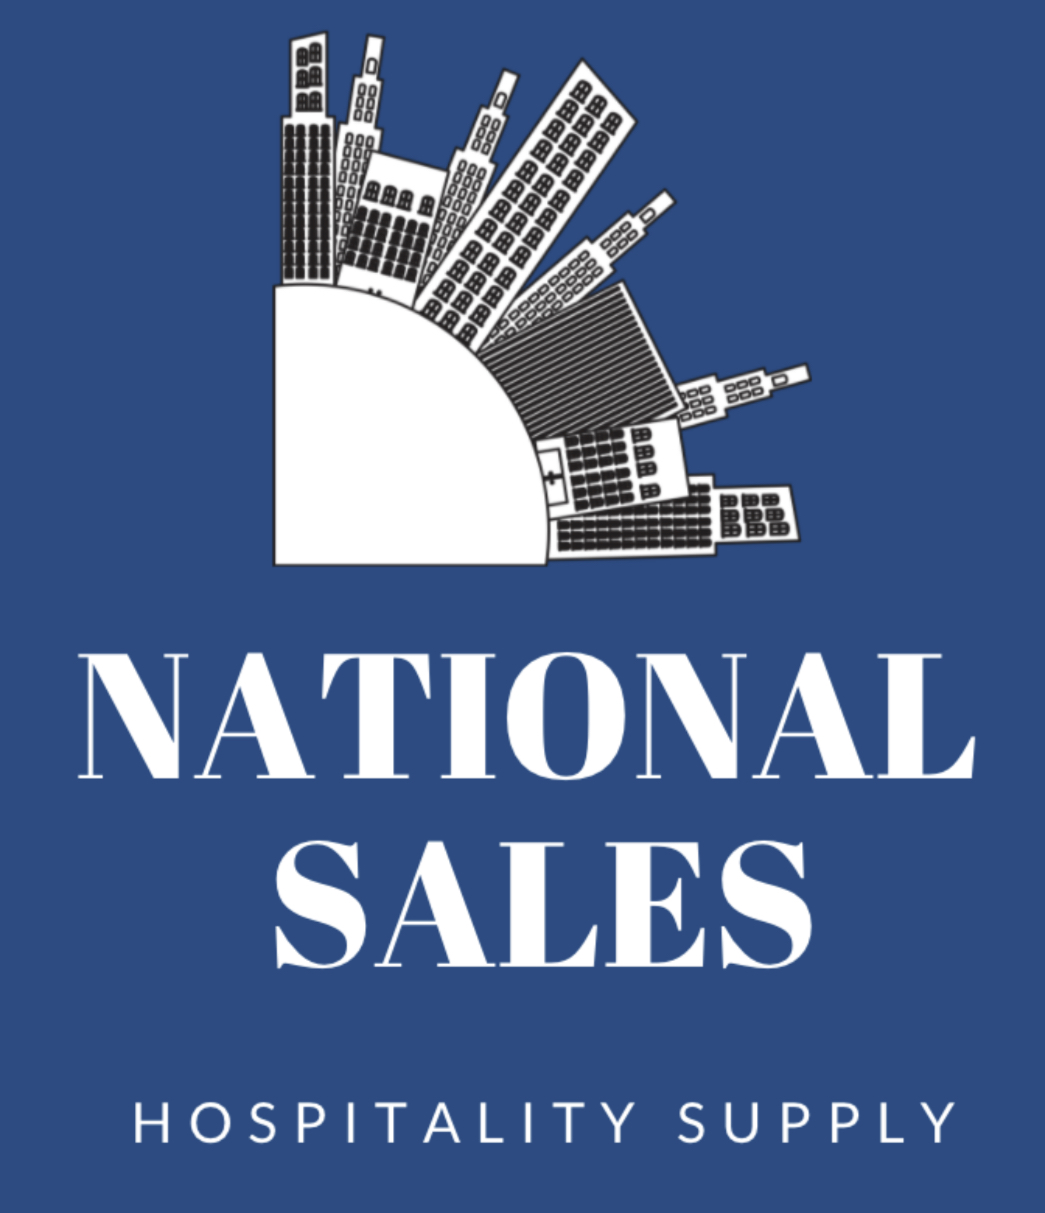 National Sales – Hotel & Hospitality Supplies Canada